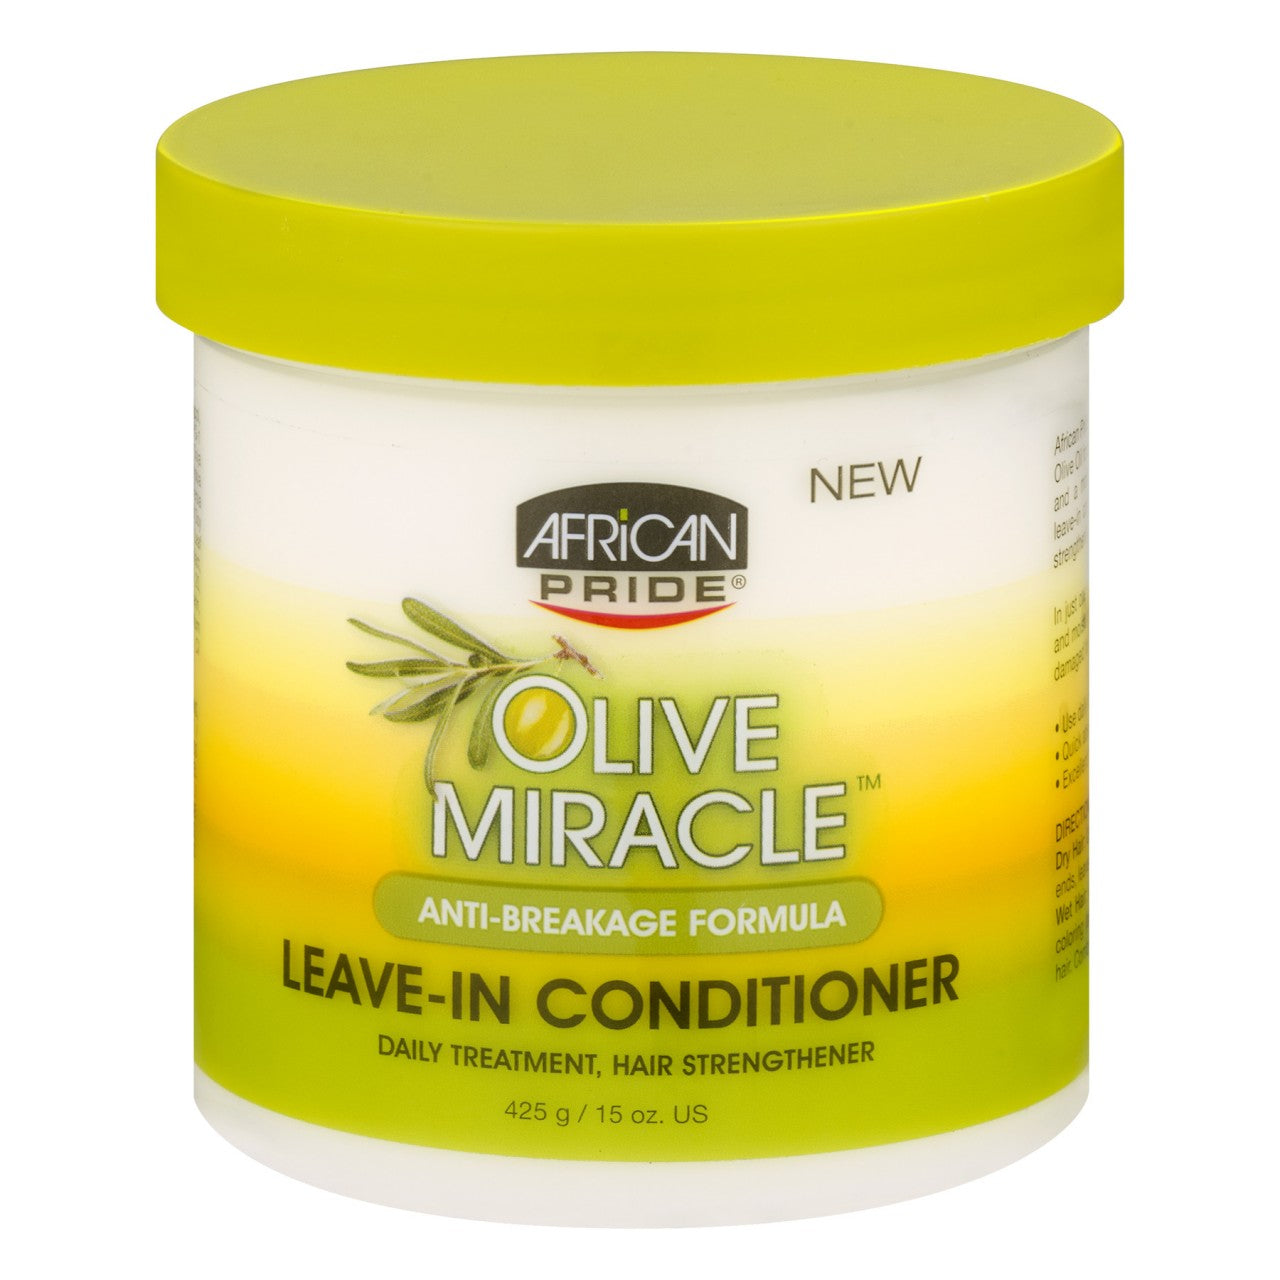 African Pride - Olive Miracle Leave-In Conditioner 15oz